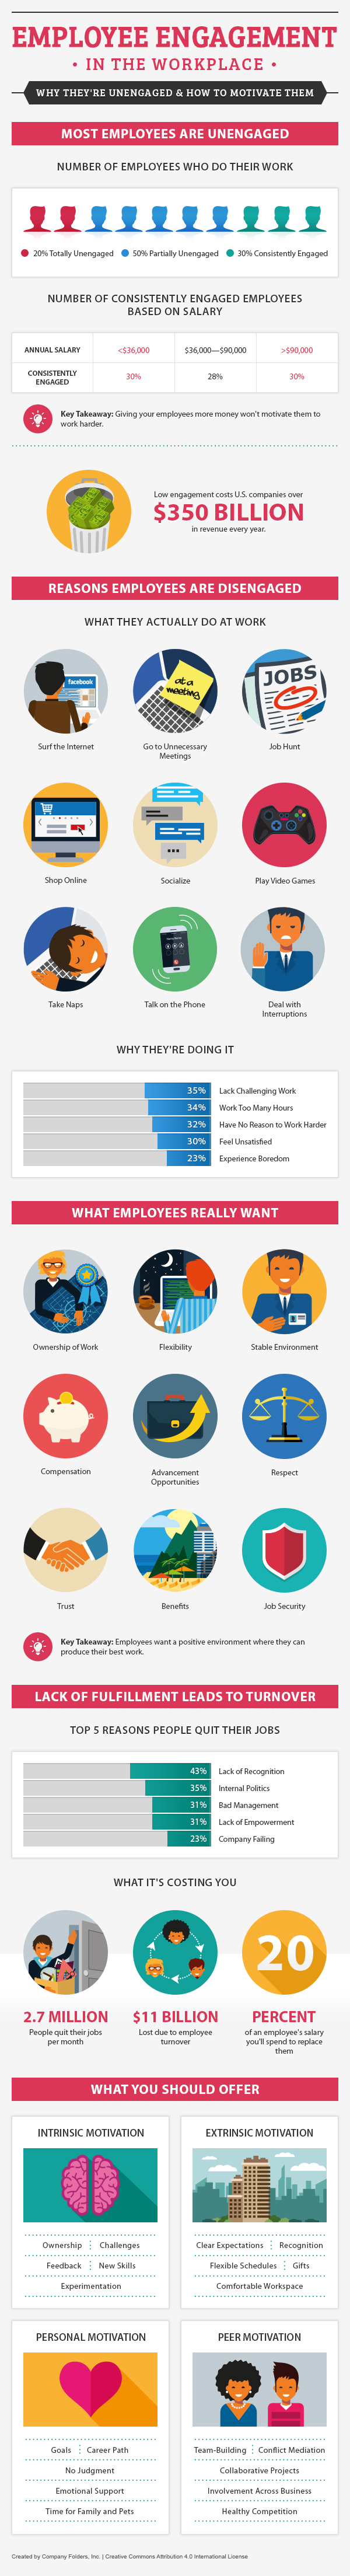 Employee Engagement In The Workplace